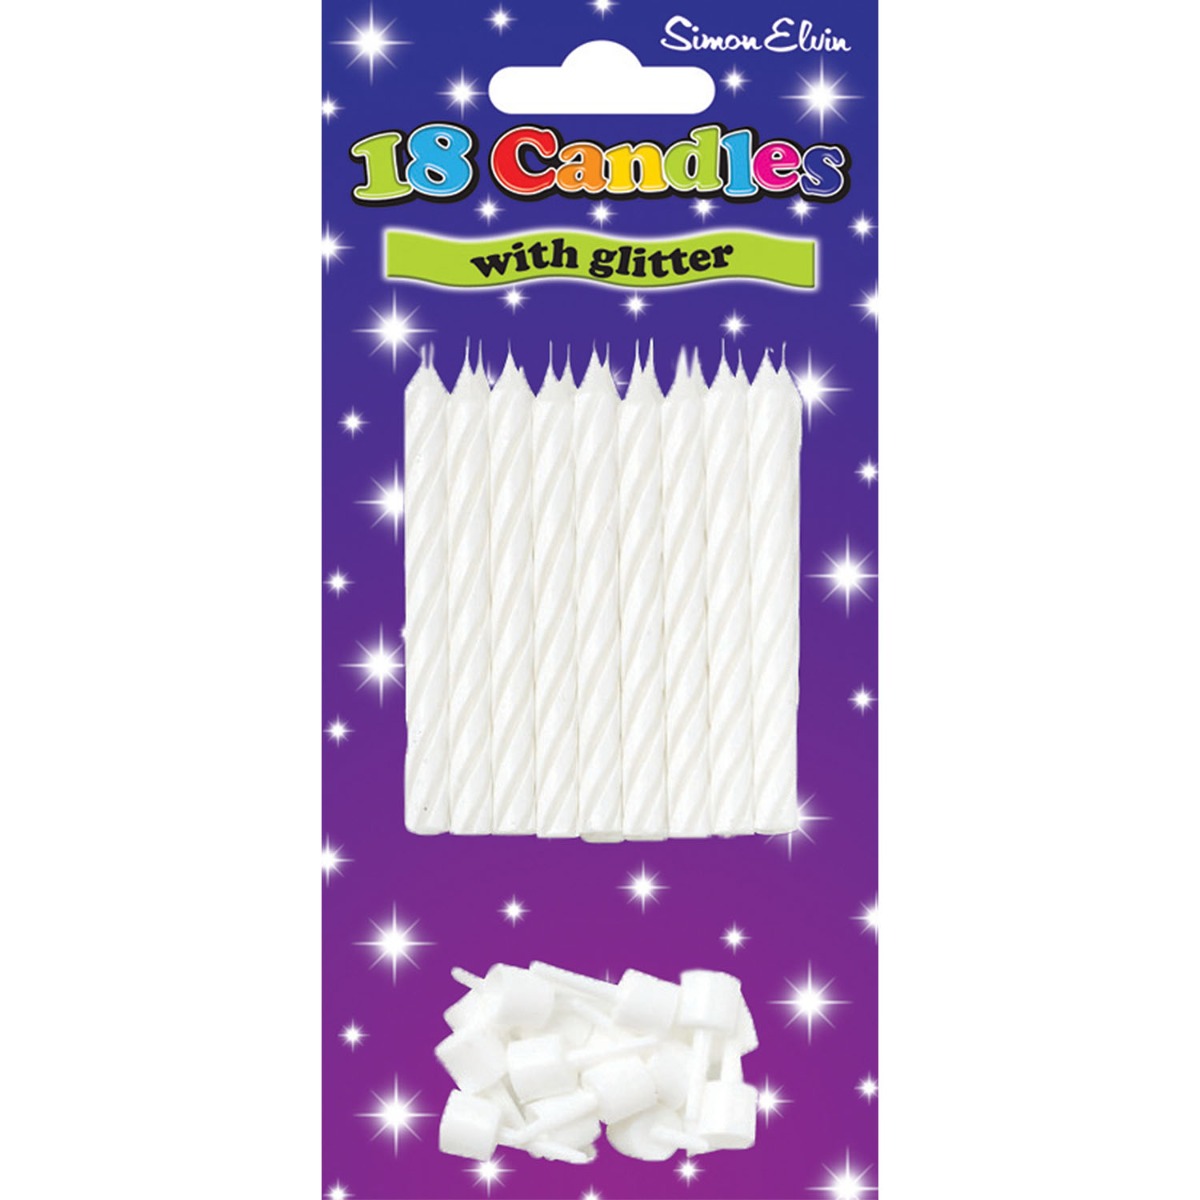 Spiral White Candles with Holder (18)